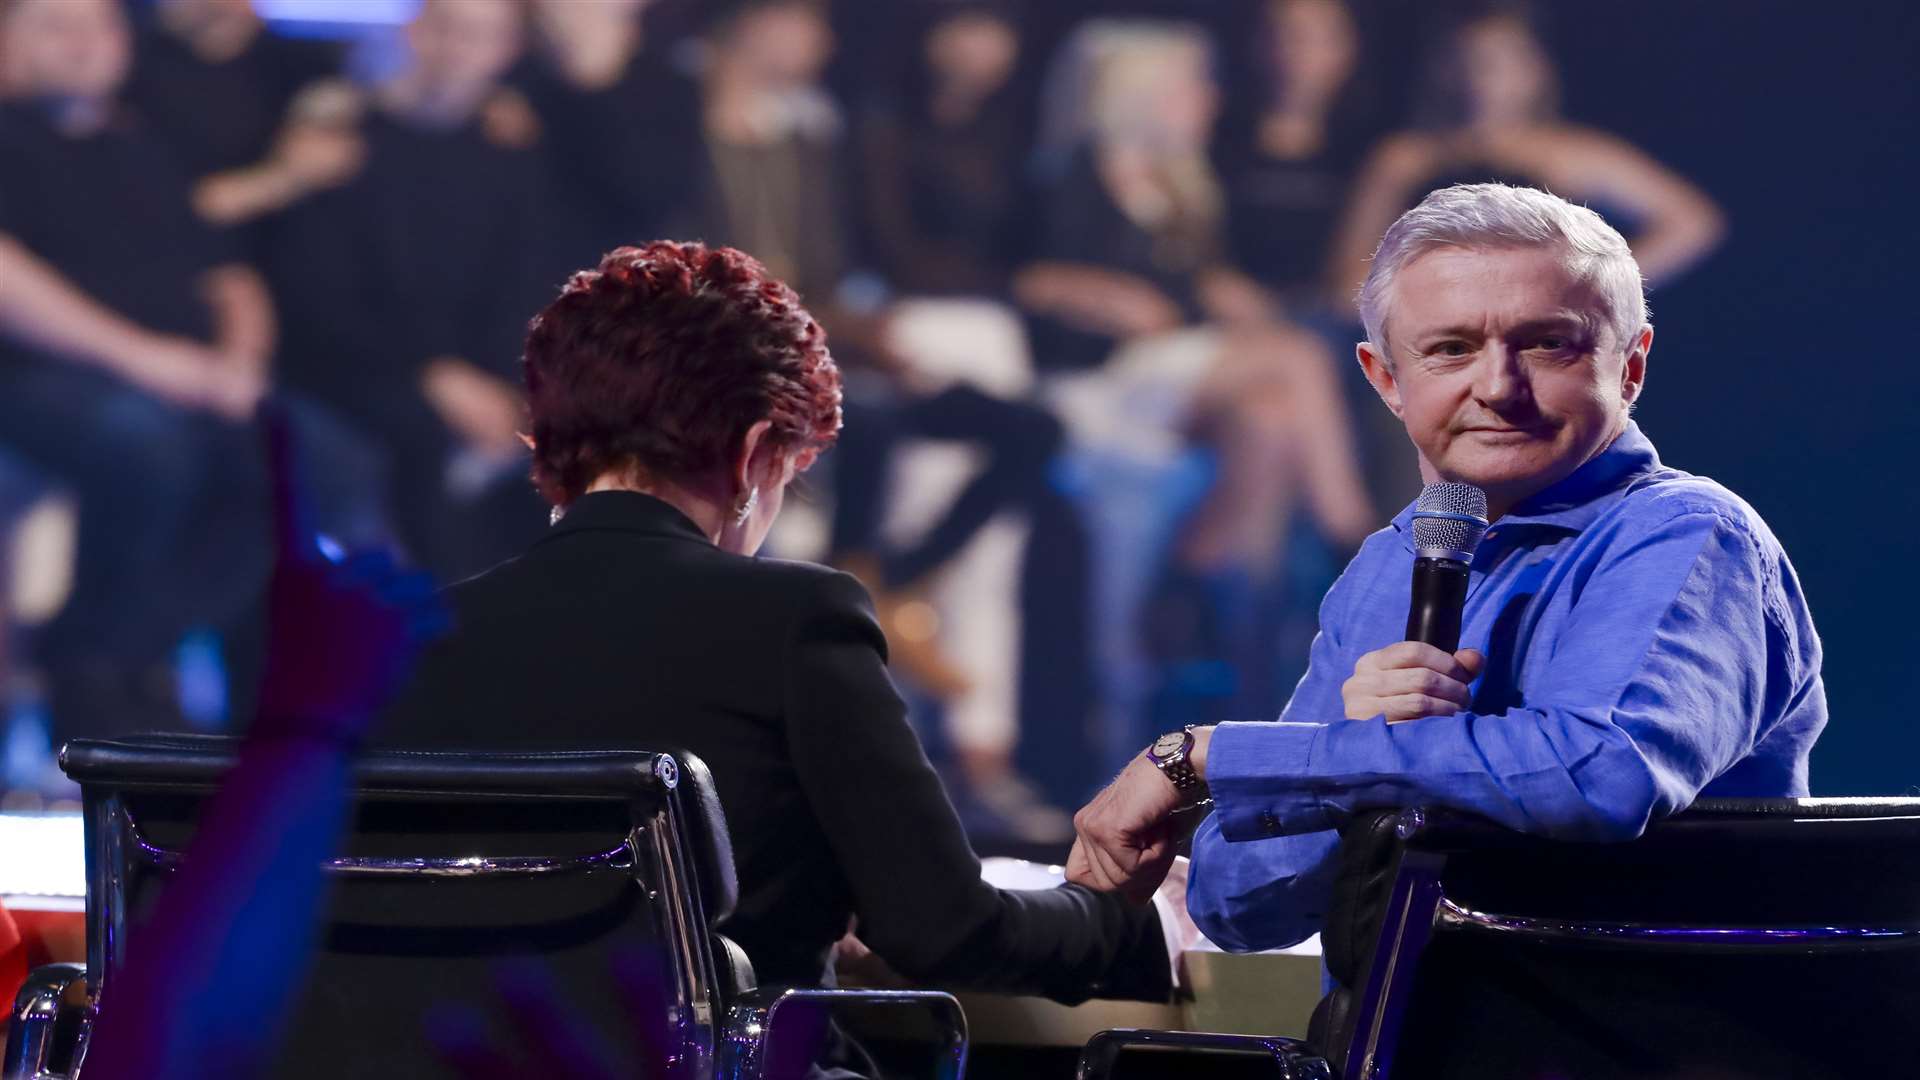 Maidstone hopefuls will have a chance to face Louis Walsh and Sharon Osbourne if they impress producers